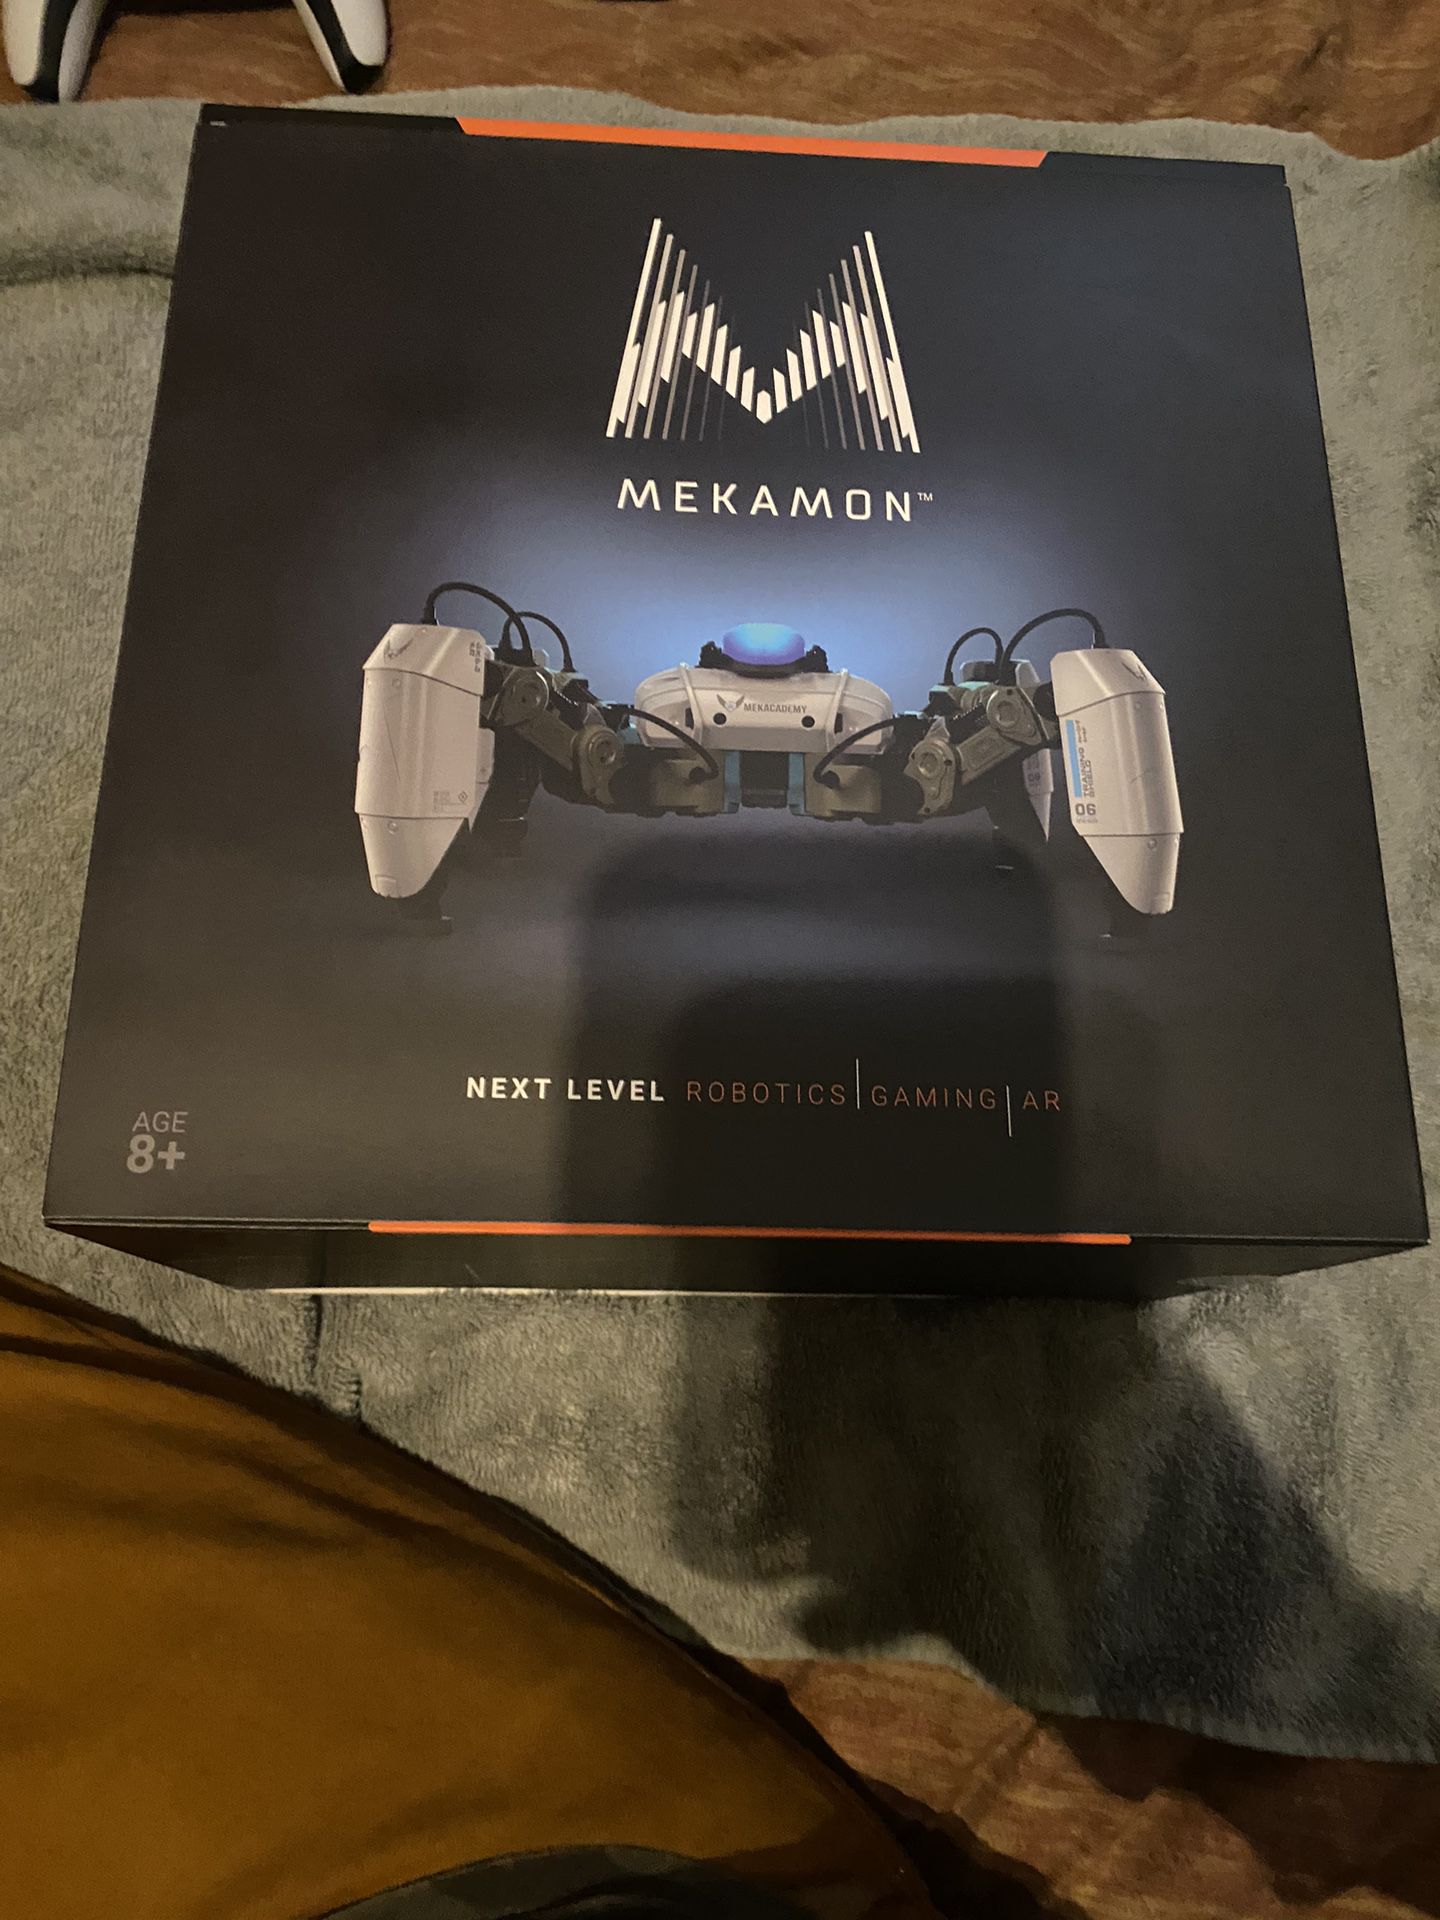 Mekamon Berserker V1 Gaming Robot - US (White) You thought your gaming rig was next level? Meet MekaMon, the world's first gaming robot. A real life b